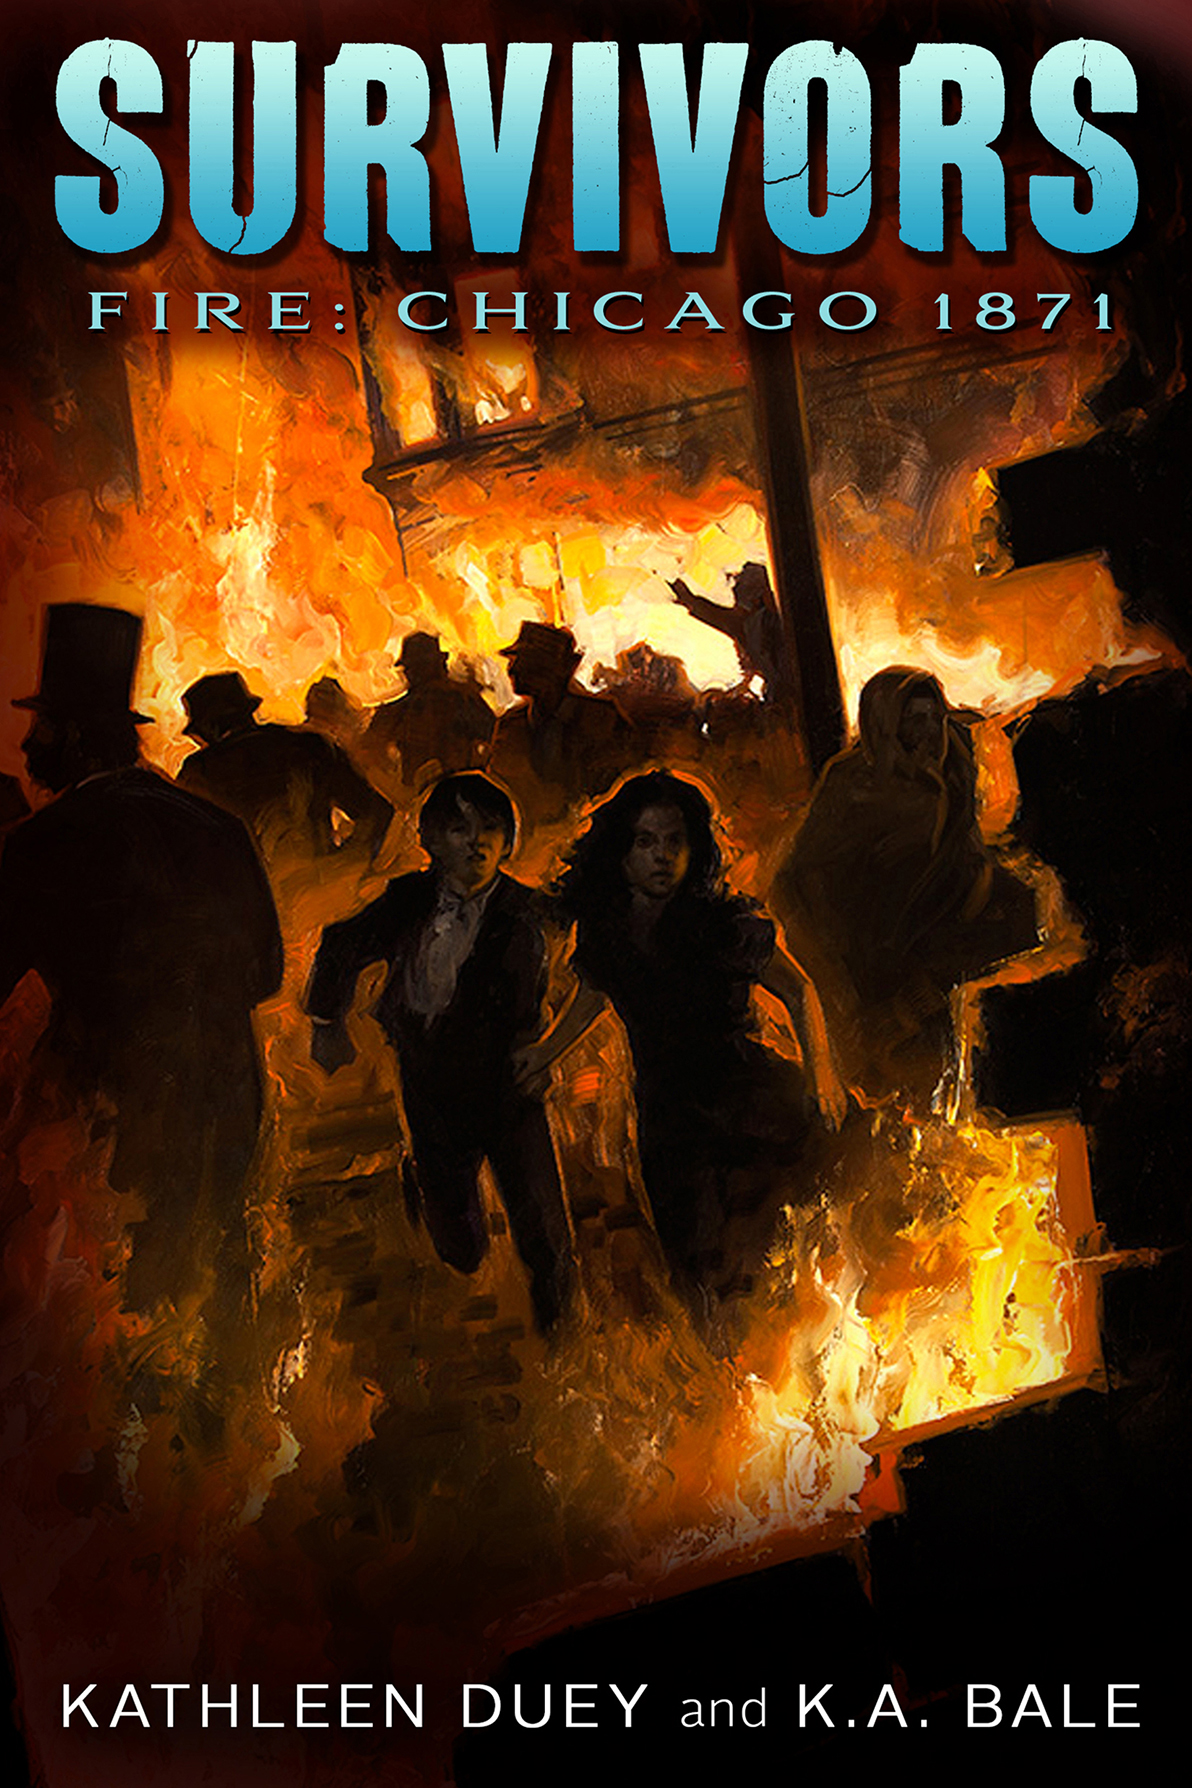 Fire: Chicago 1871